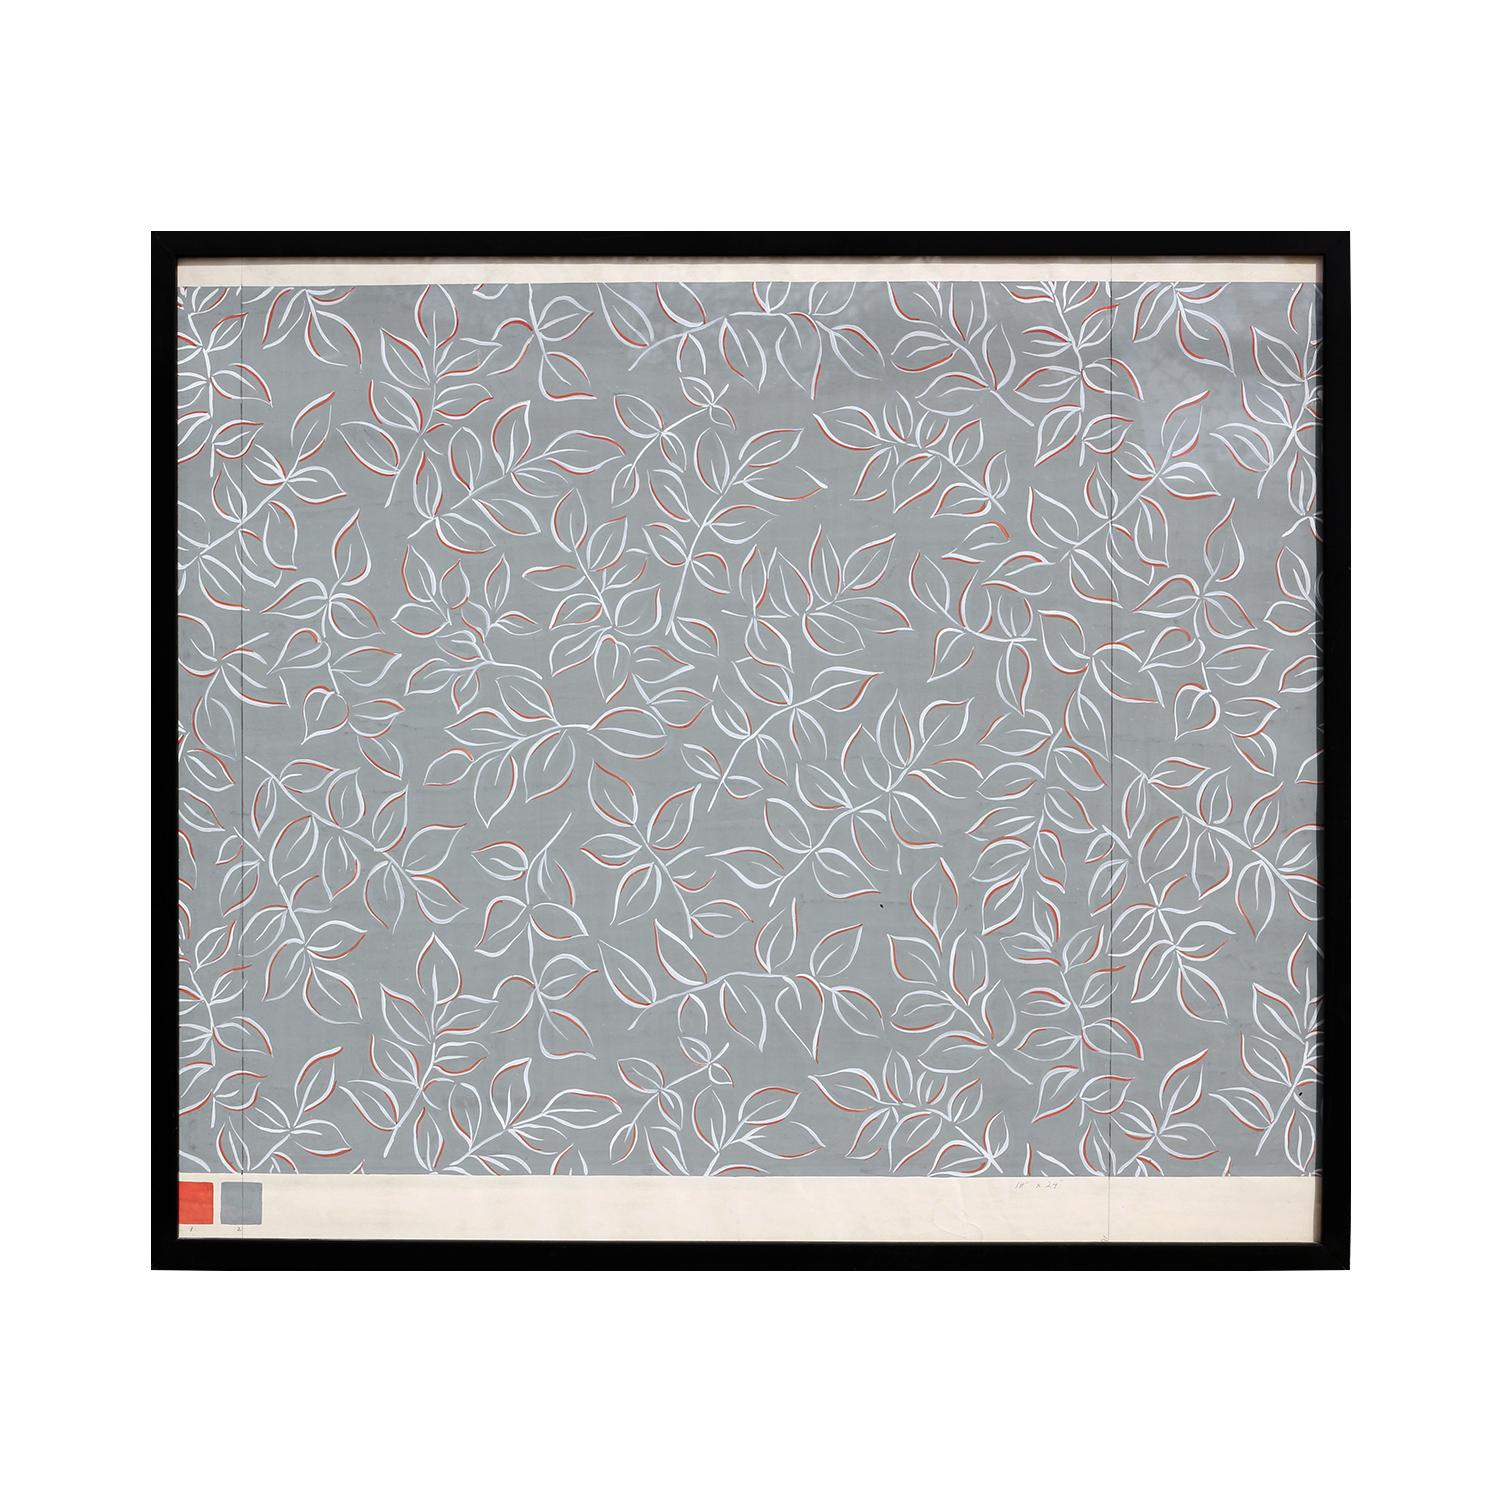 Modern Grey and Orange Geometric Abstract Leaf Pattern Painting - Art by John Little